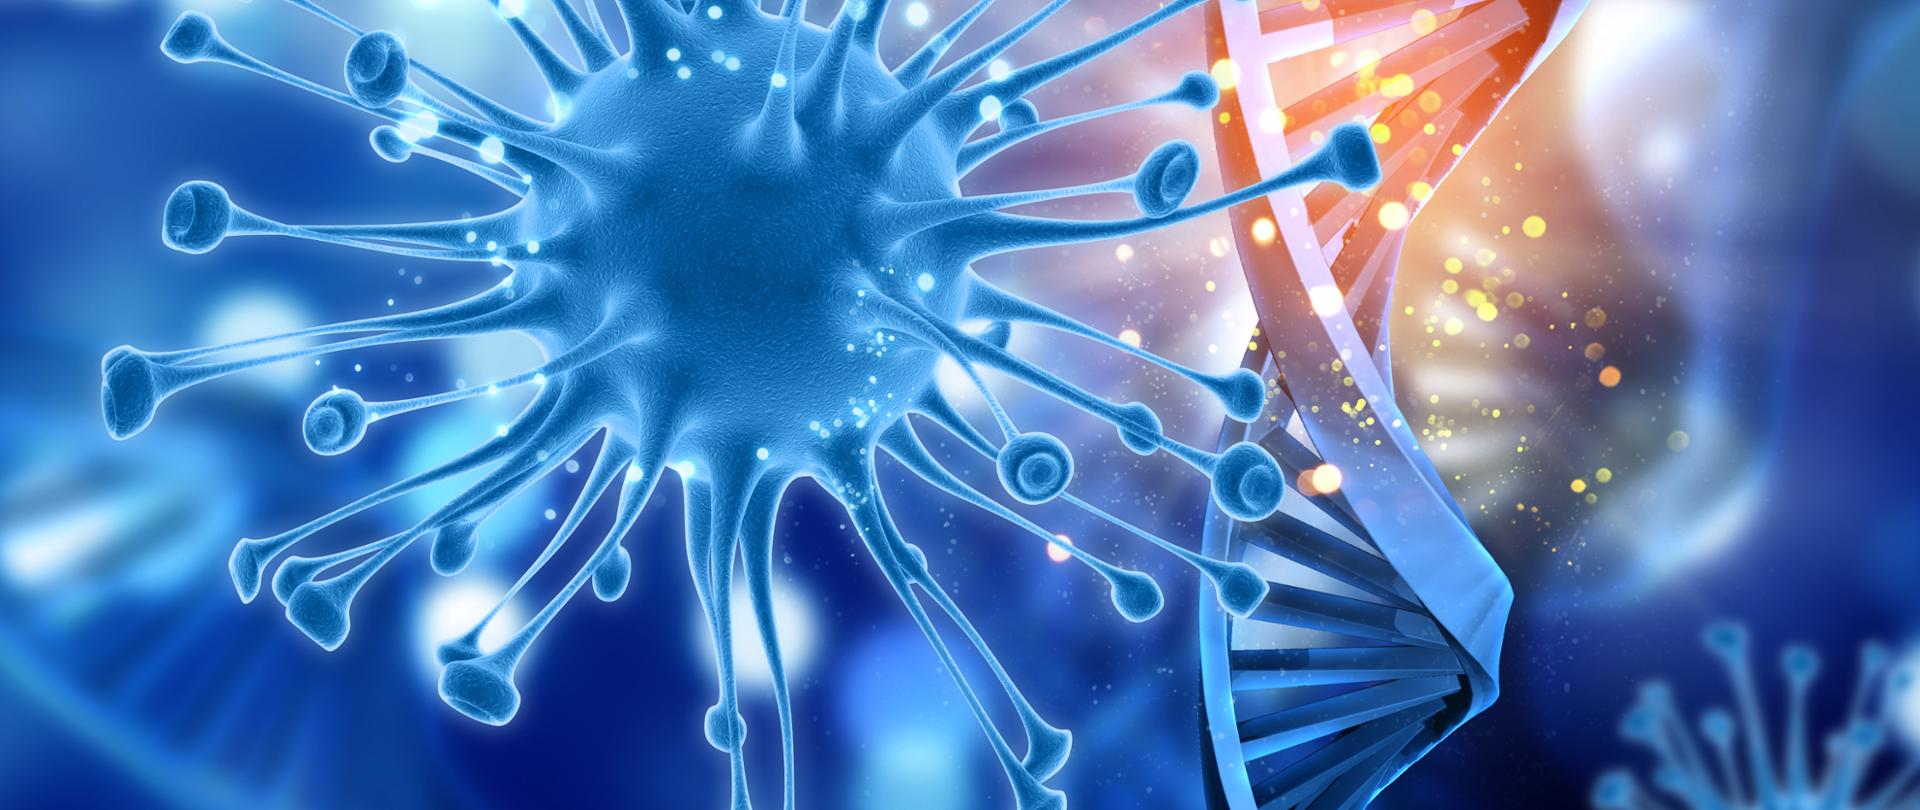 3D render of a medical background with virus cells and DNA strands